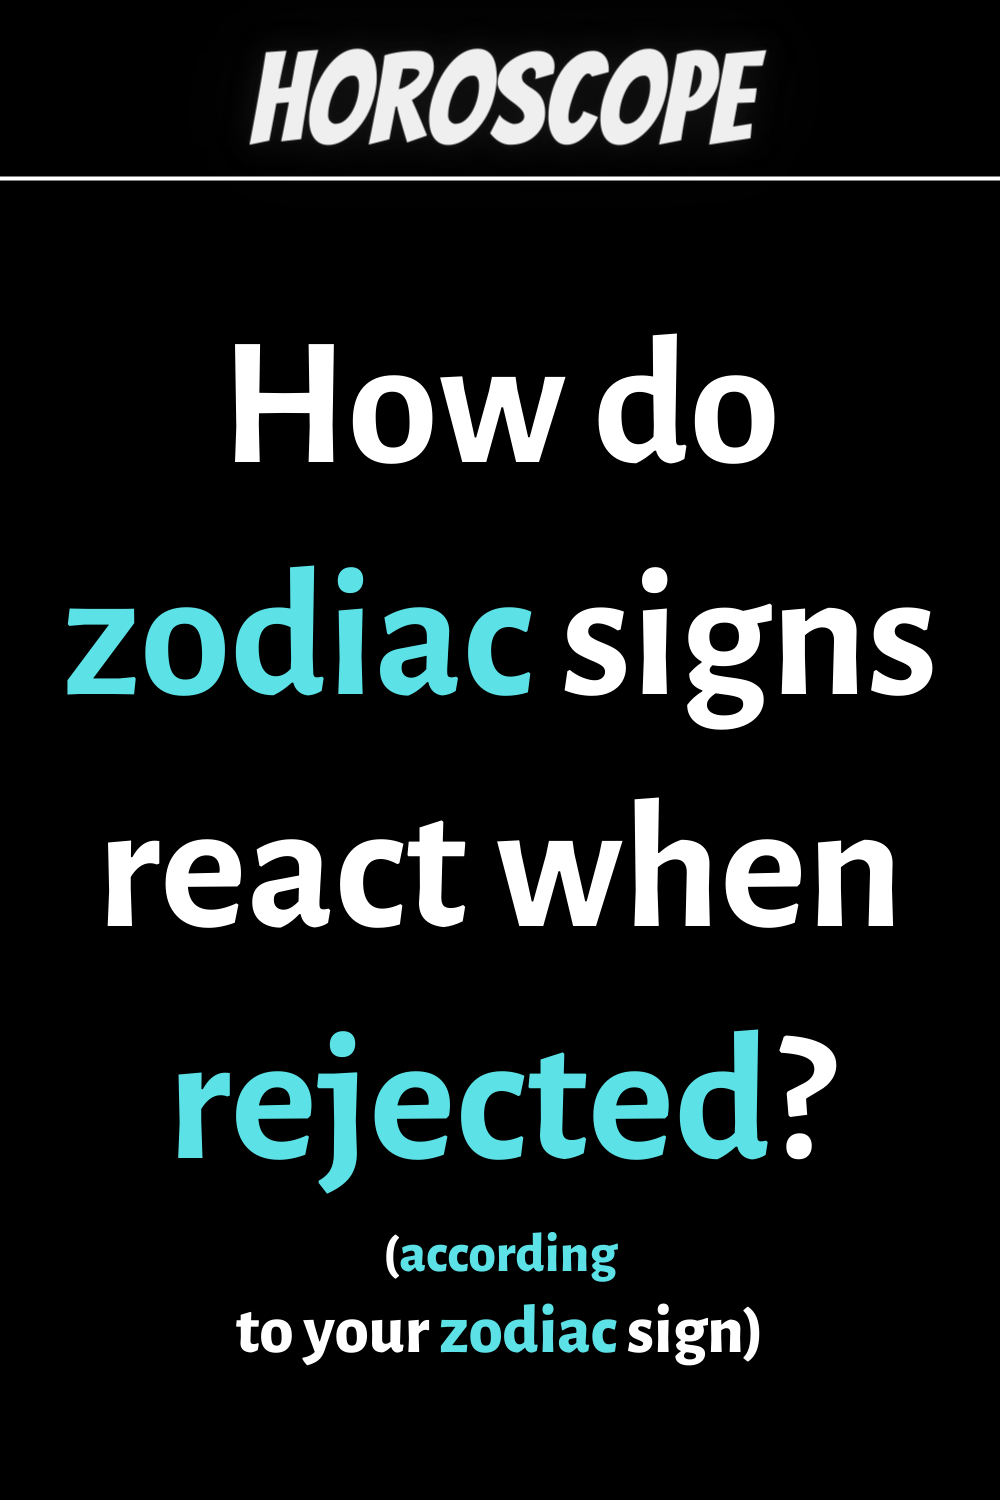 How do zodiac signs react when rejected?